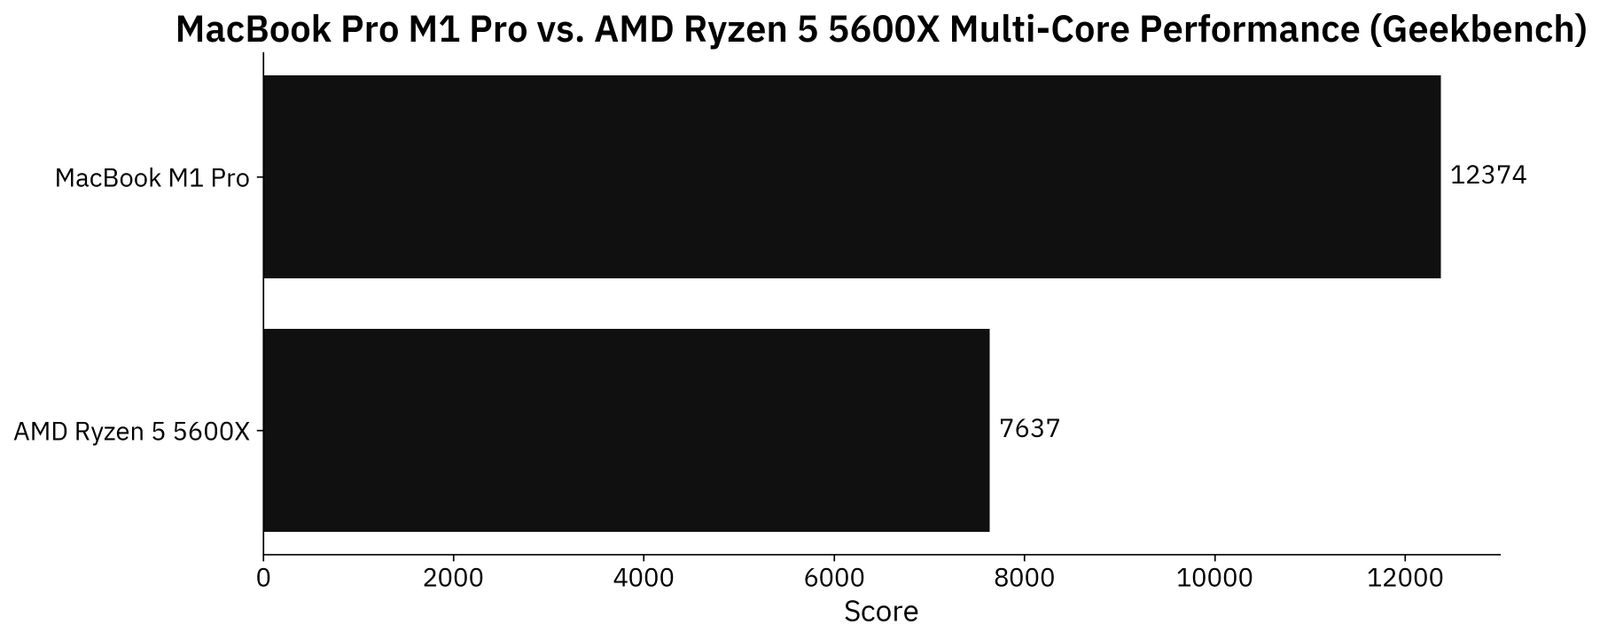 Image 3 - Geekbench multi-core performance test (image by author)